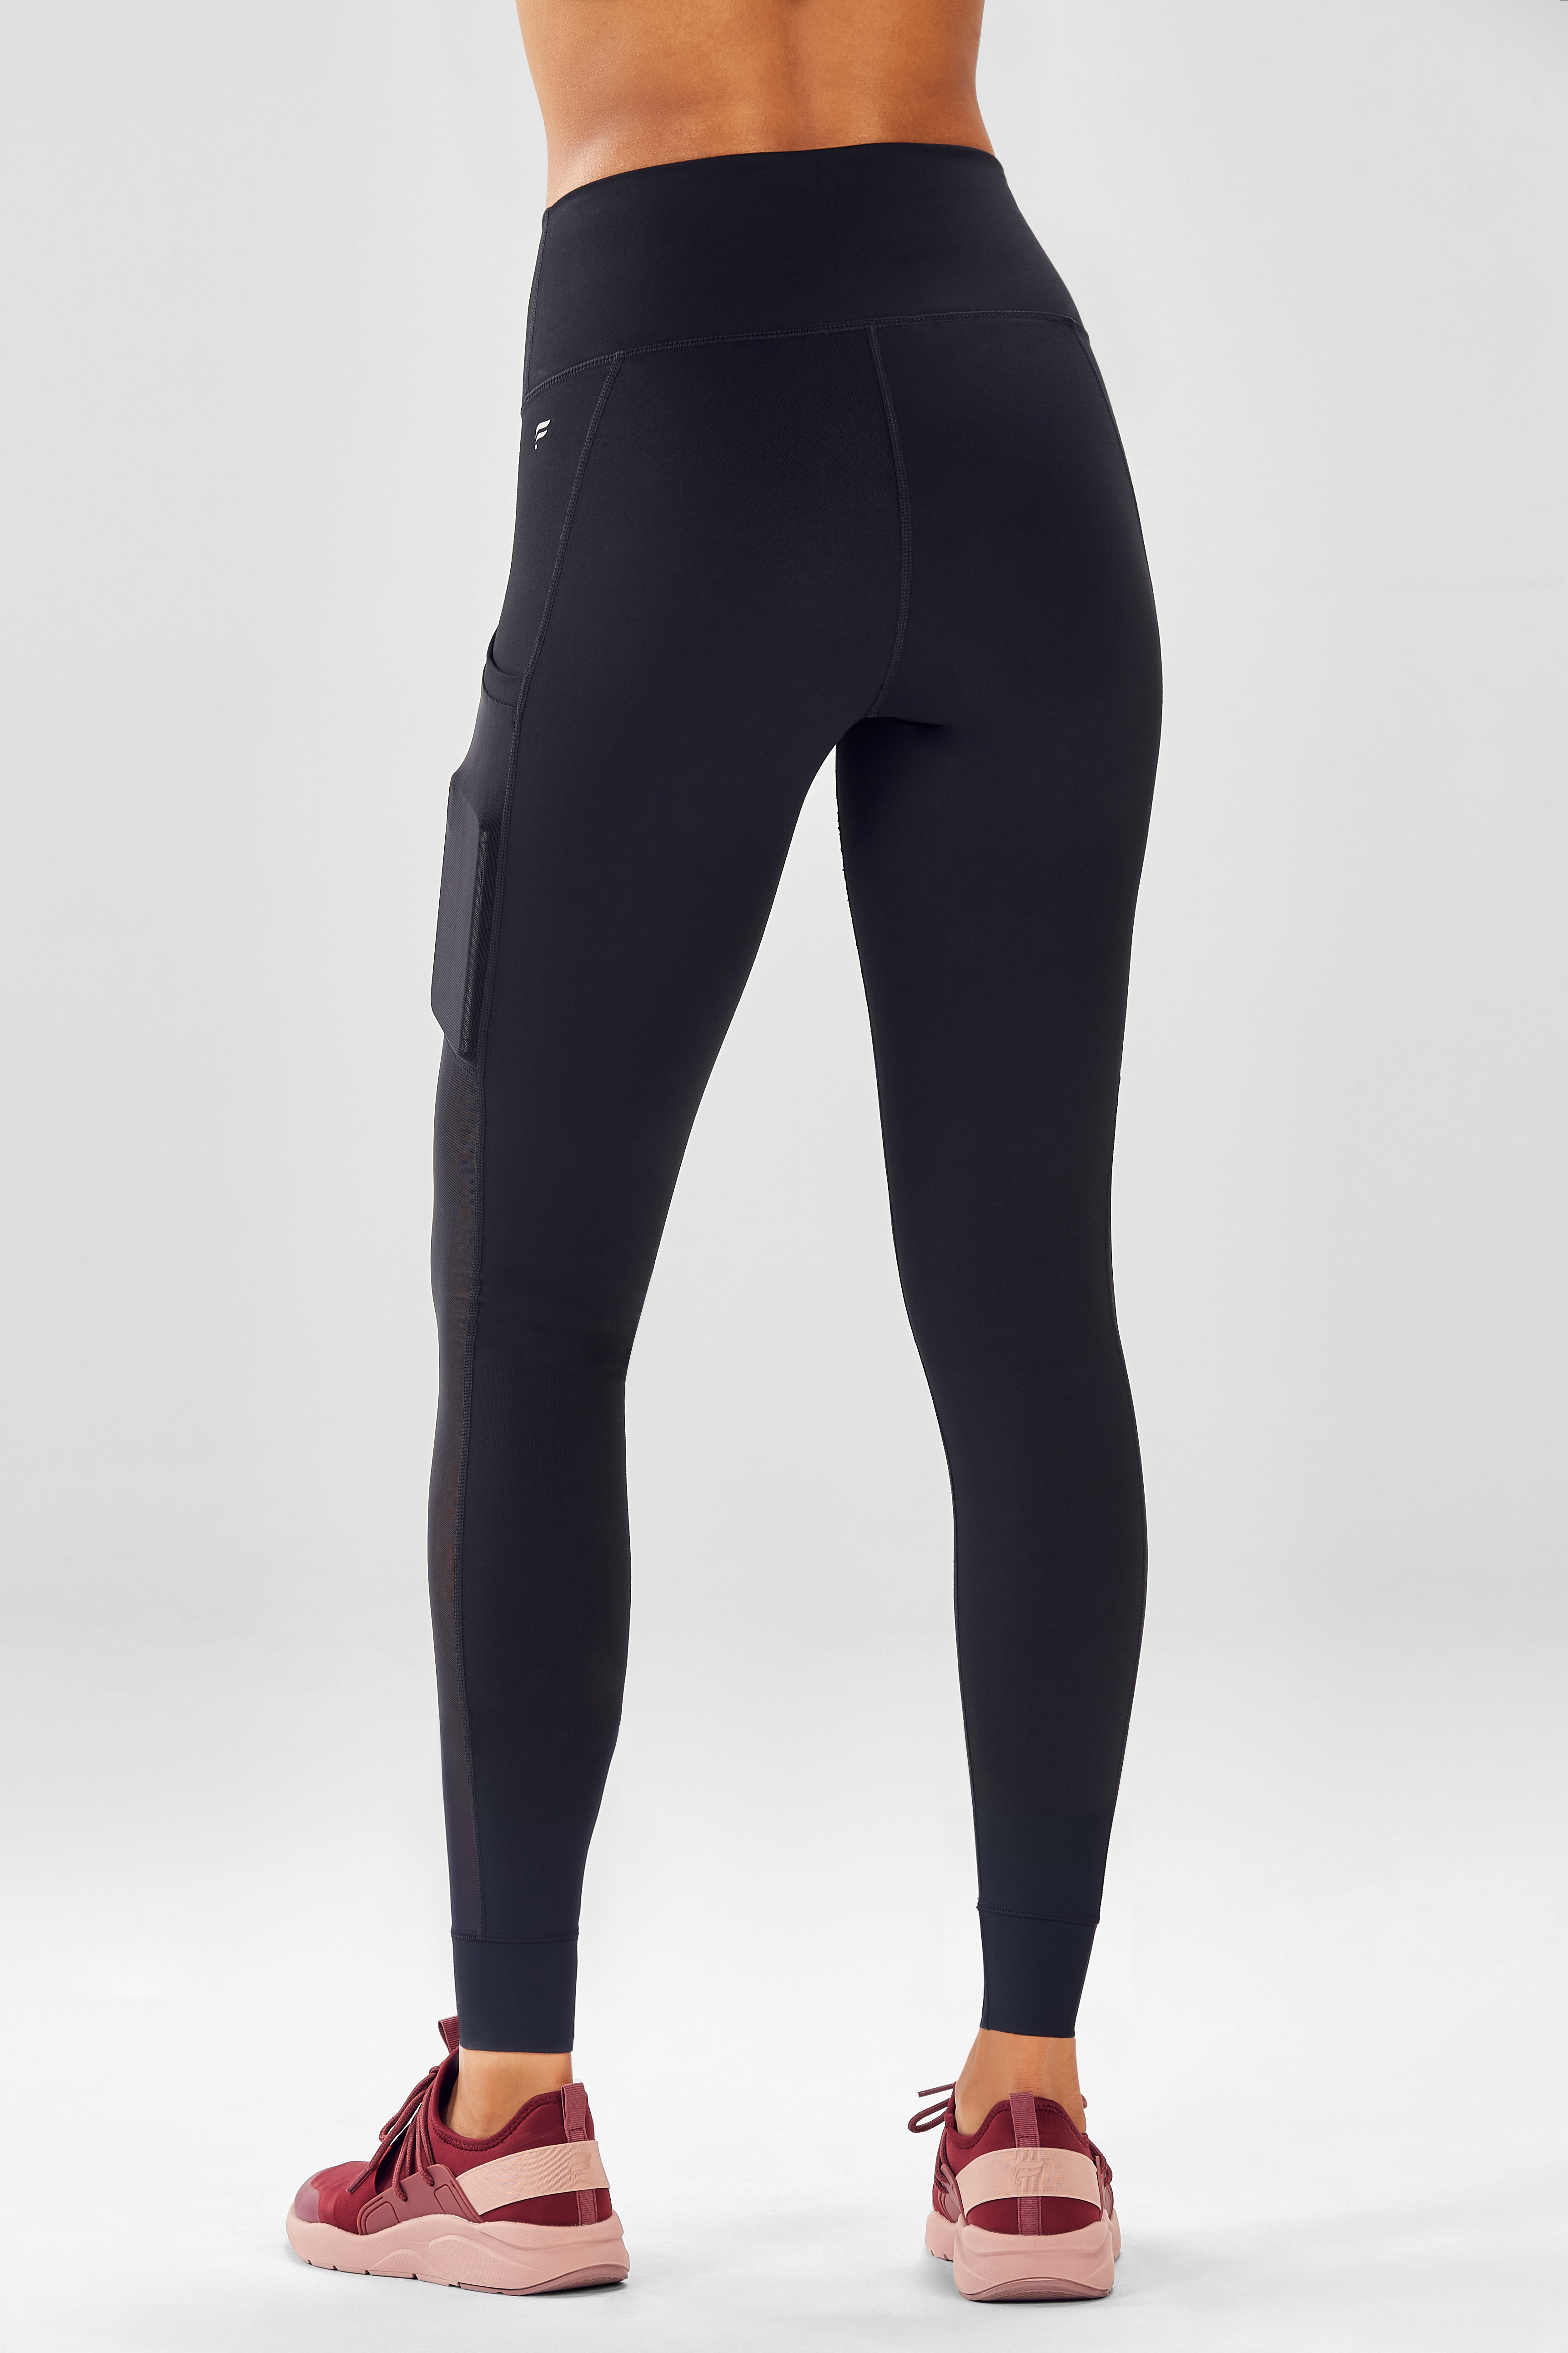 Fabletics Leggings For Men  International Society of Precision Agriculture